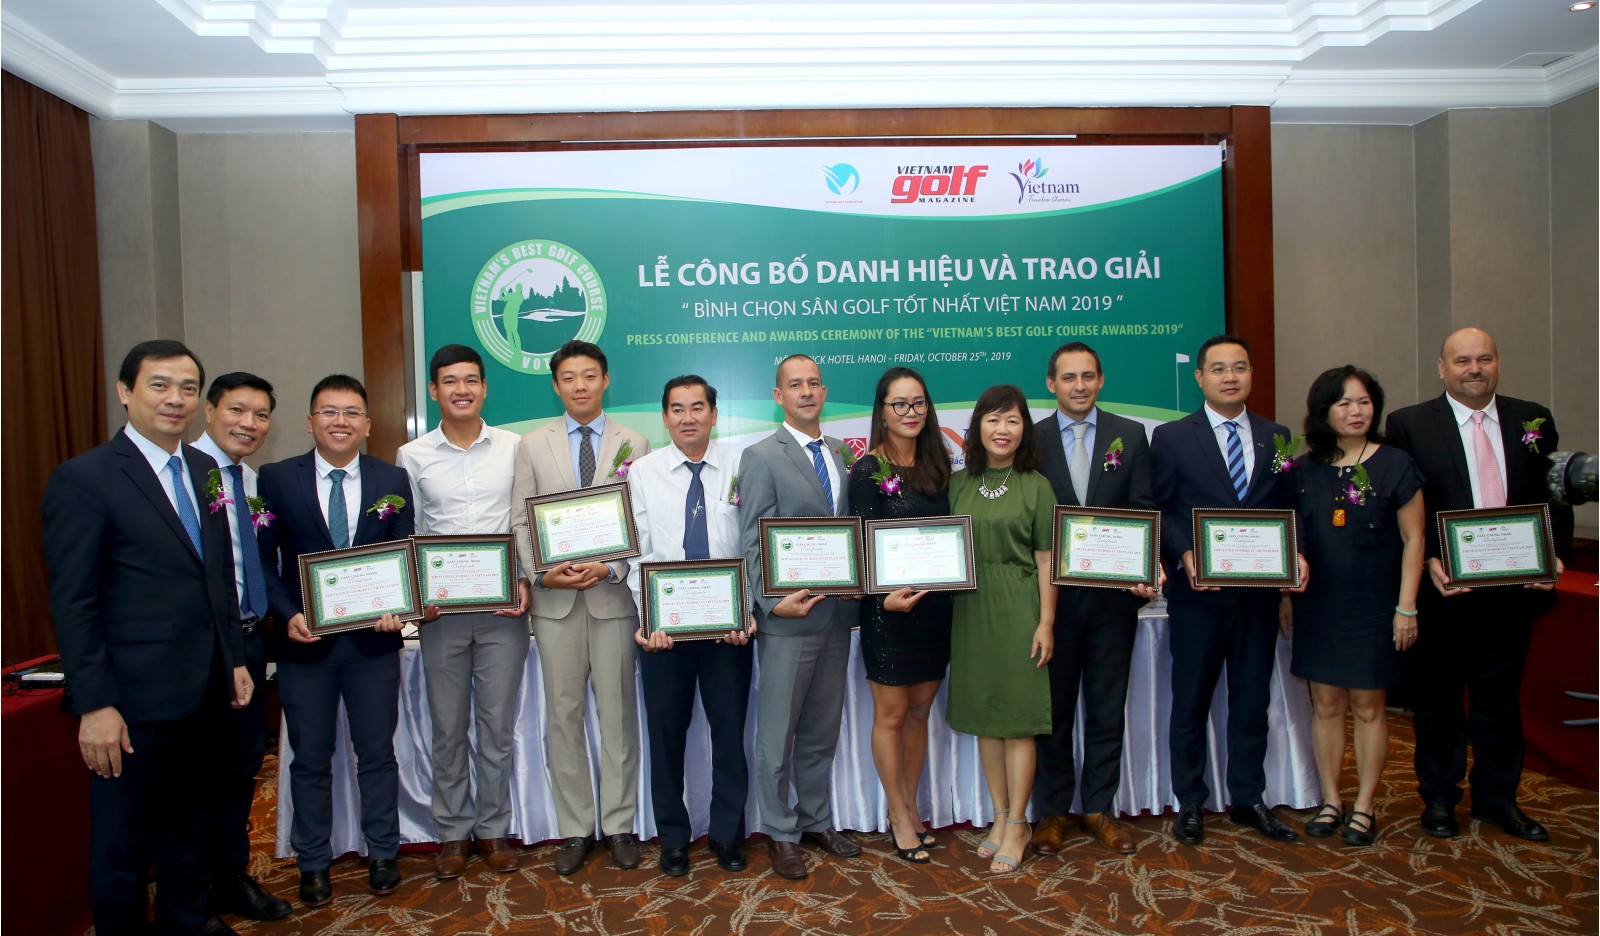 The Organisation Board gave Certificates for representatives of the courses winning title "Top 10 Golf Courses 2019"